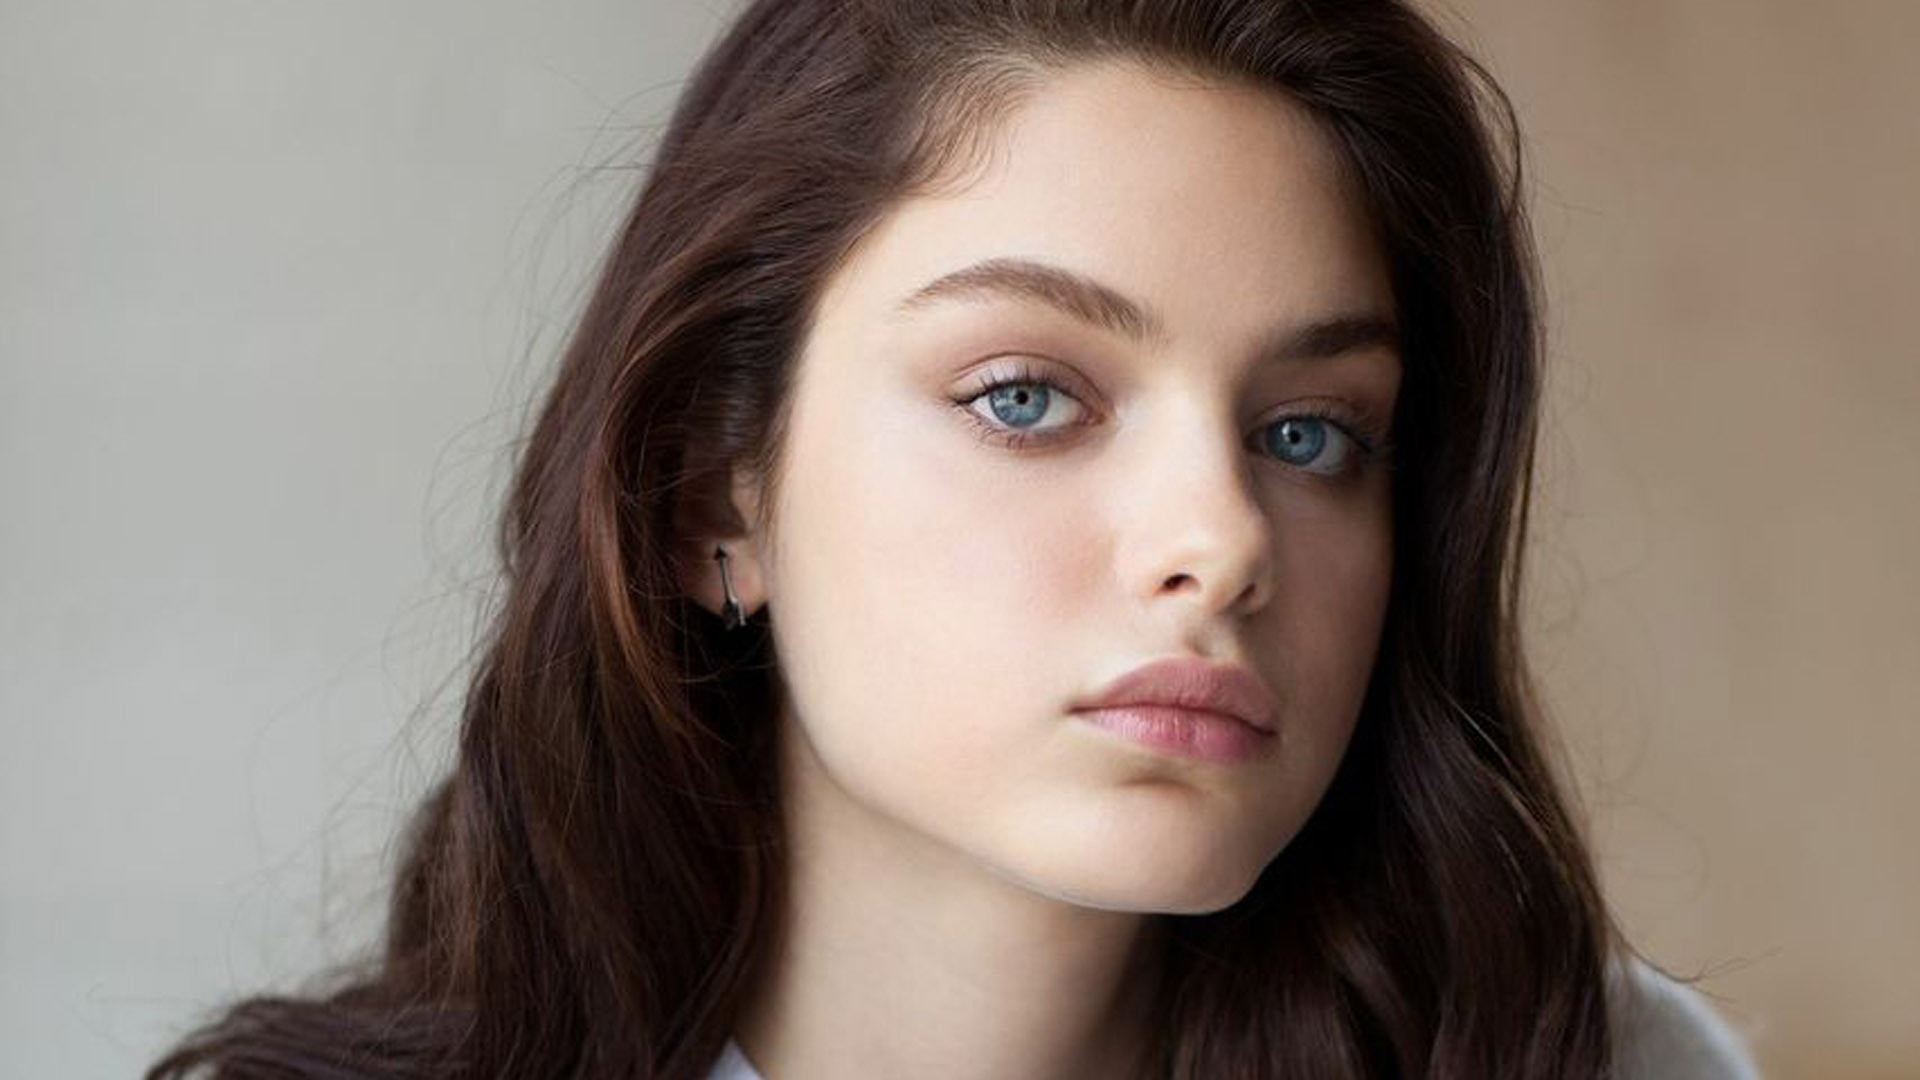 1920x1080 Odeya Rush Wallpapers Images Photos Pictures Backgrounds 1920Ã1080